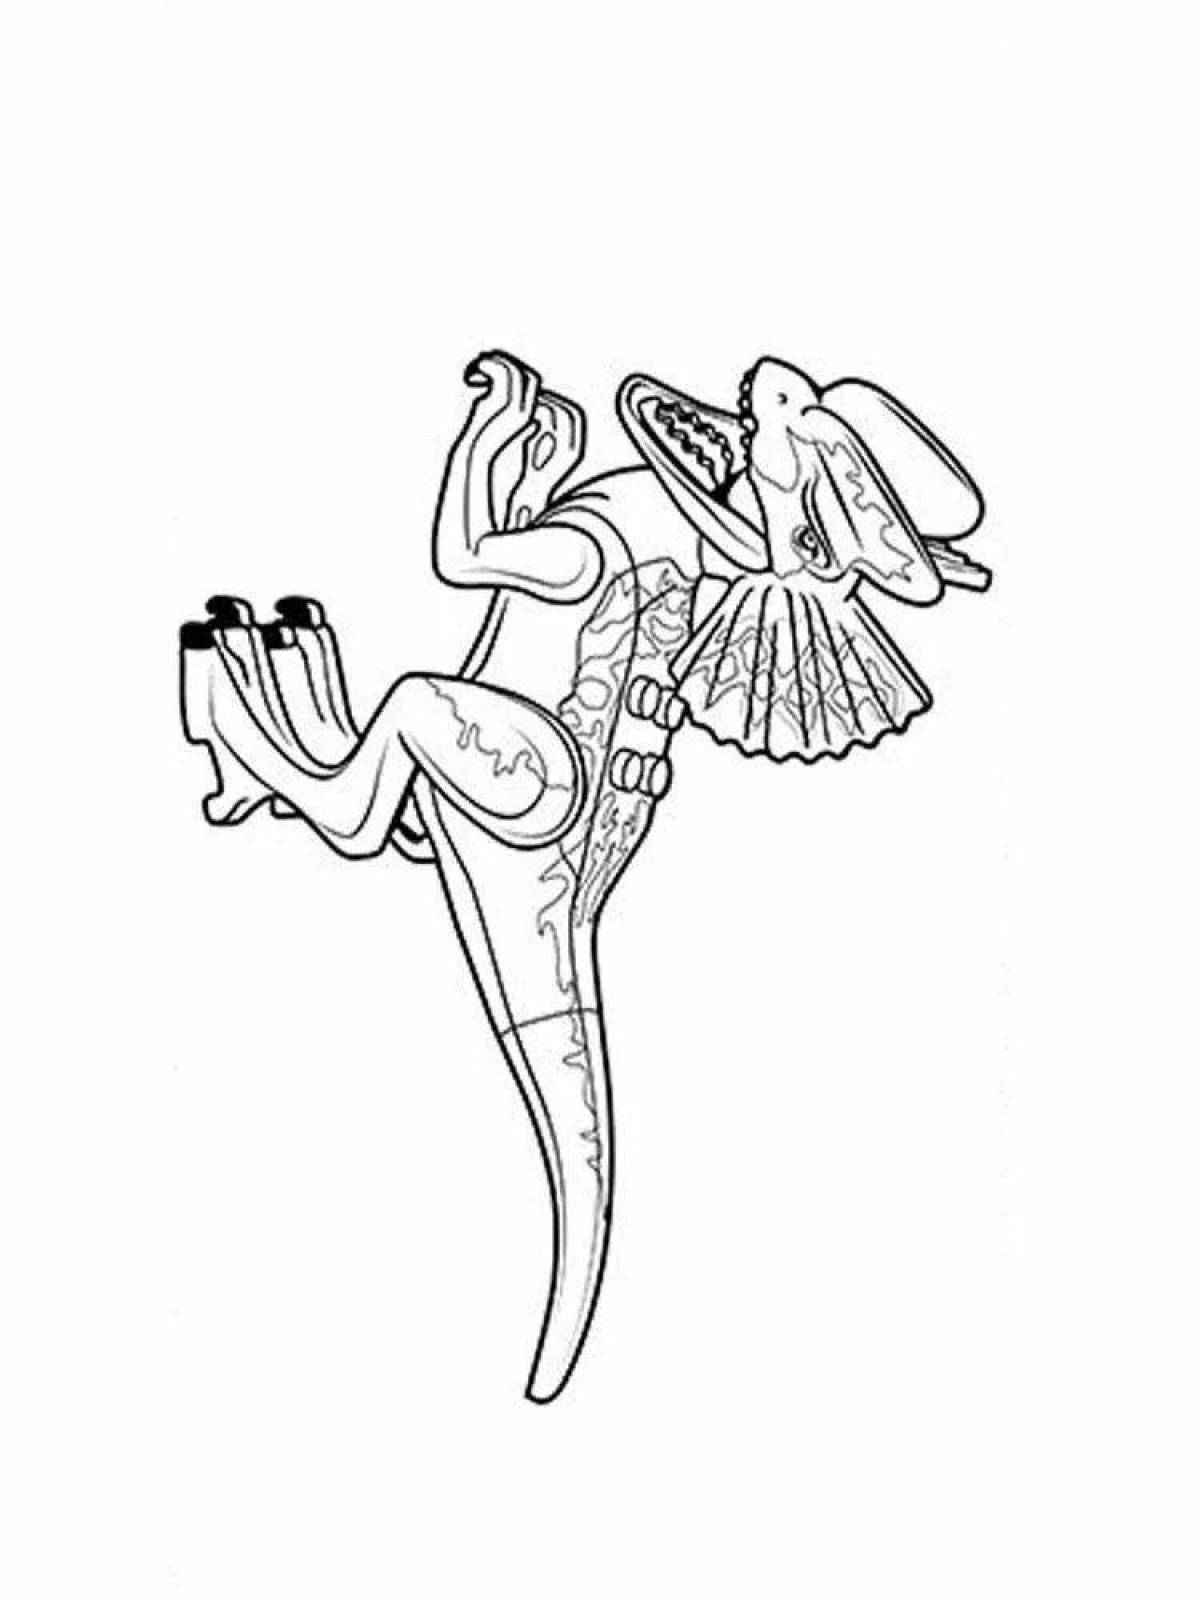 Fairy lego dinosaur coloring page